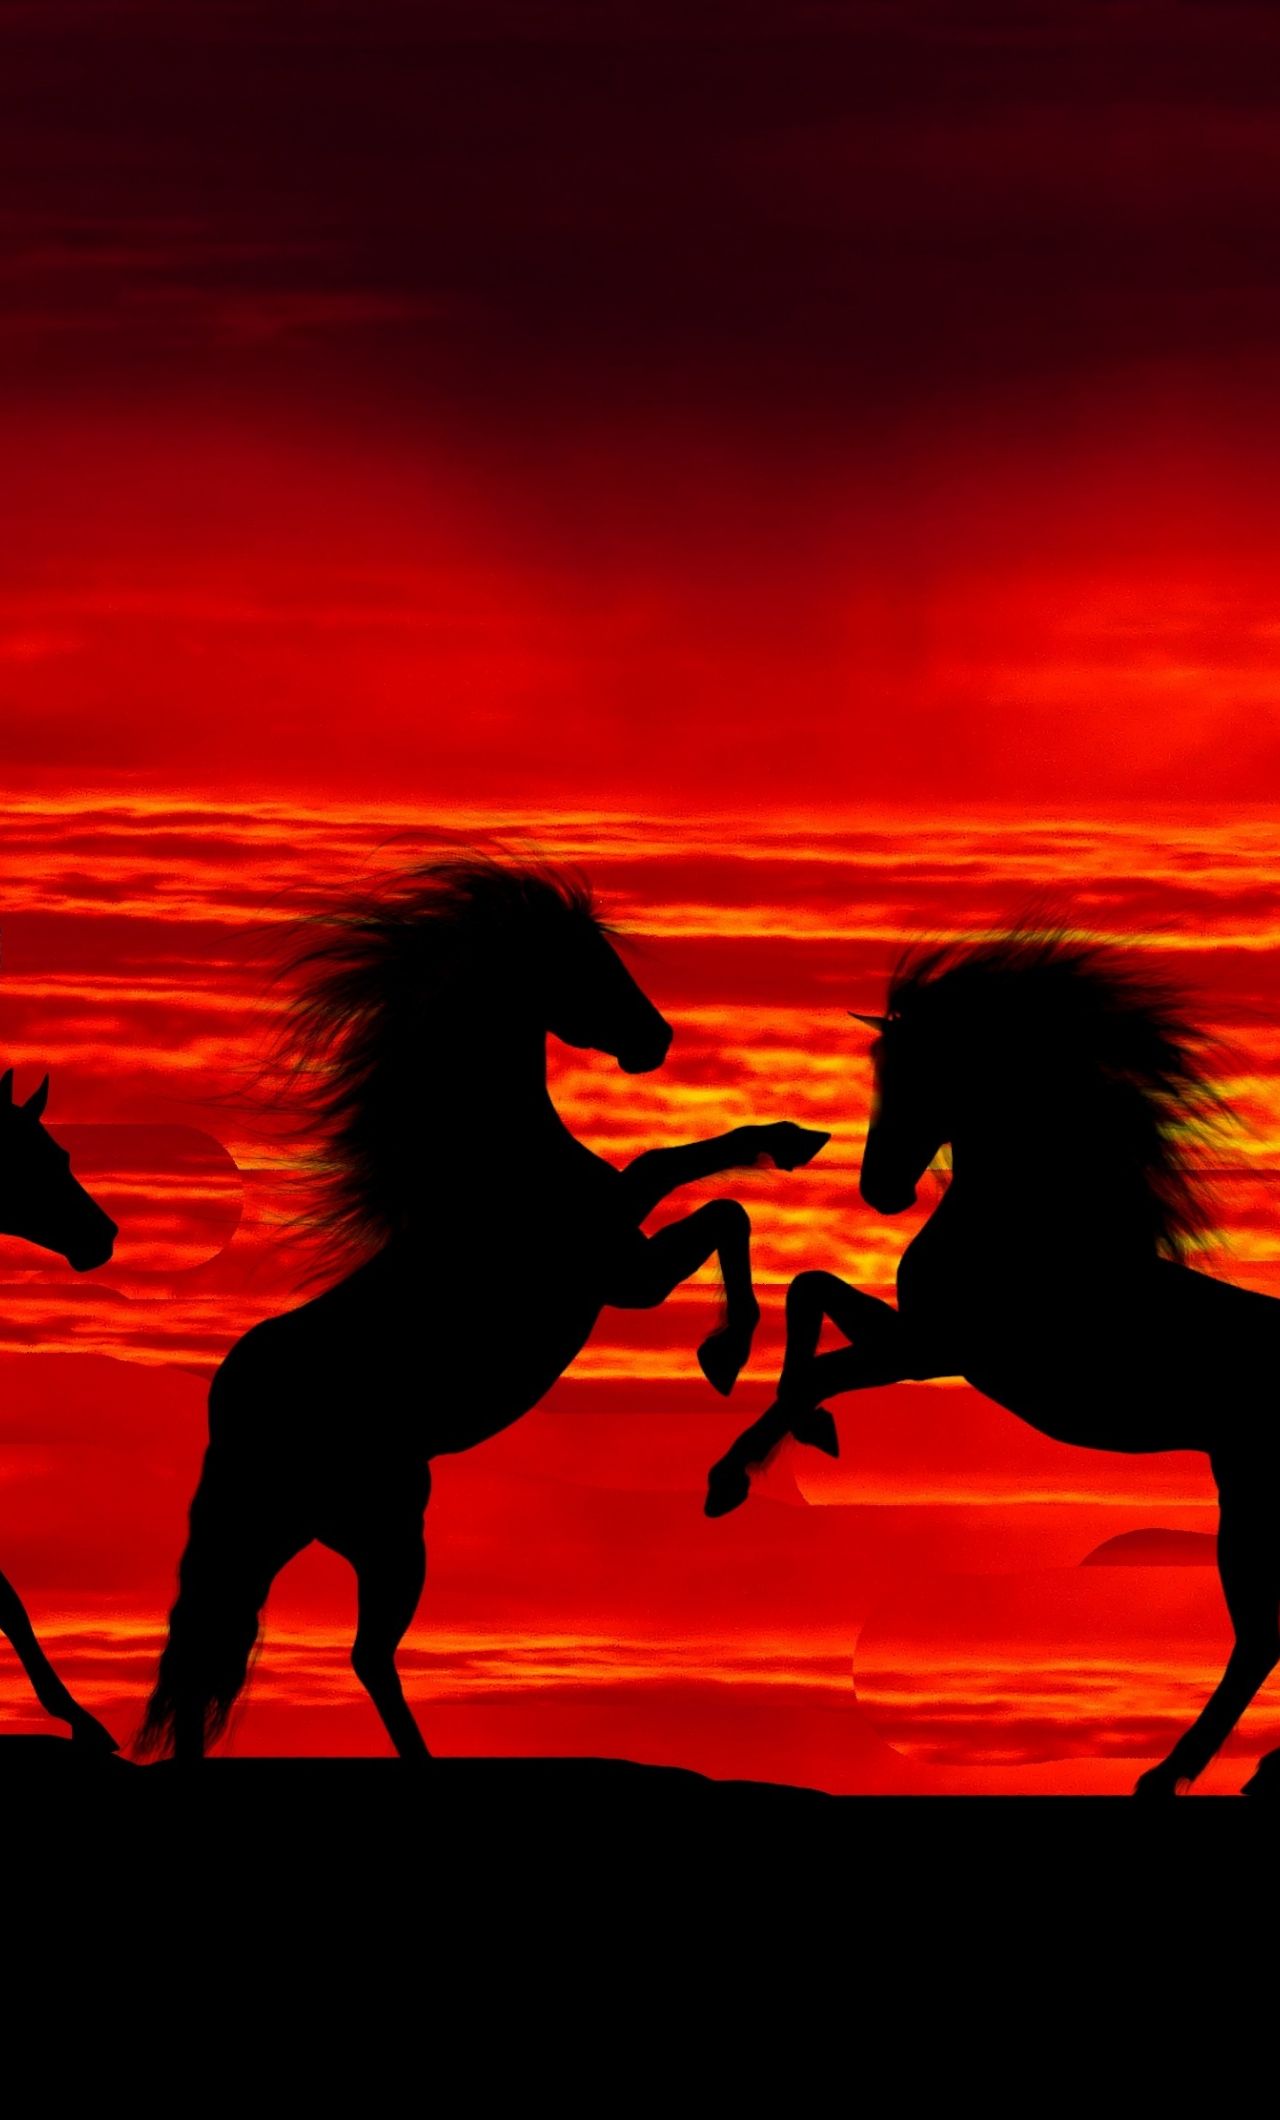 Download 1280x2120 wallpaper sunset, silhouette, horses, herd, iphone 6 plus, 1280x2120 HD image, background, 15521